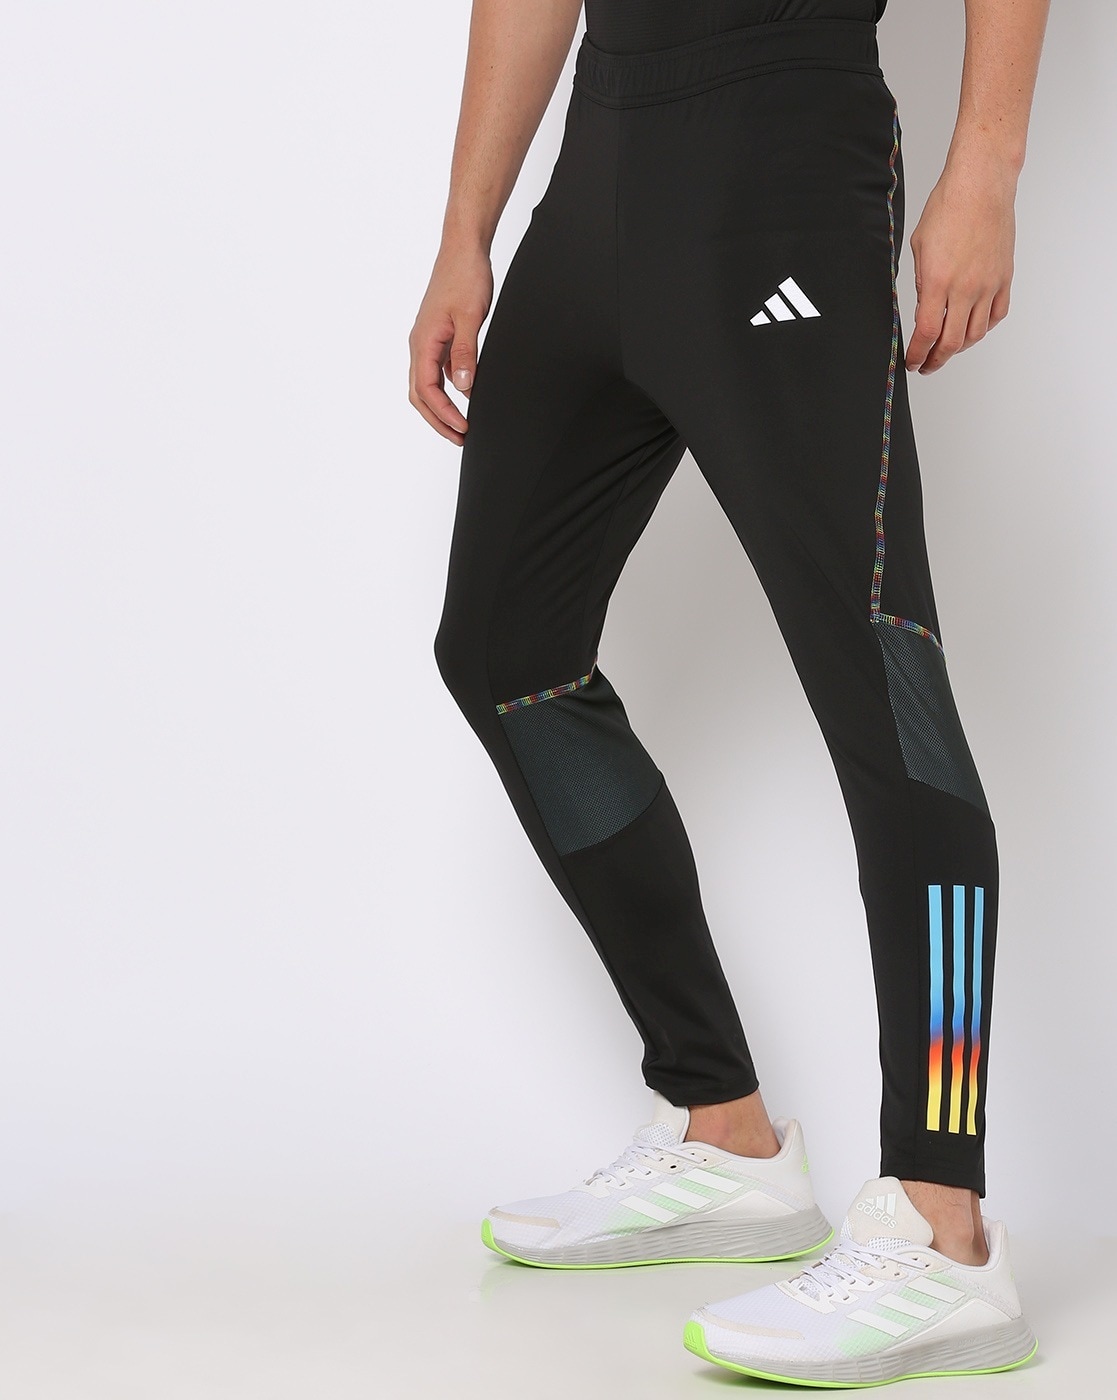 Adidas Designed For Movement Training Pants | Pants & Sweats | Stirling  Sports